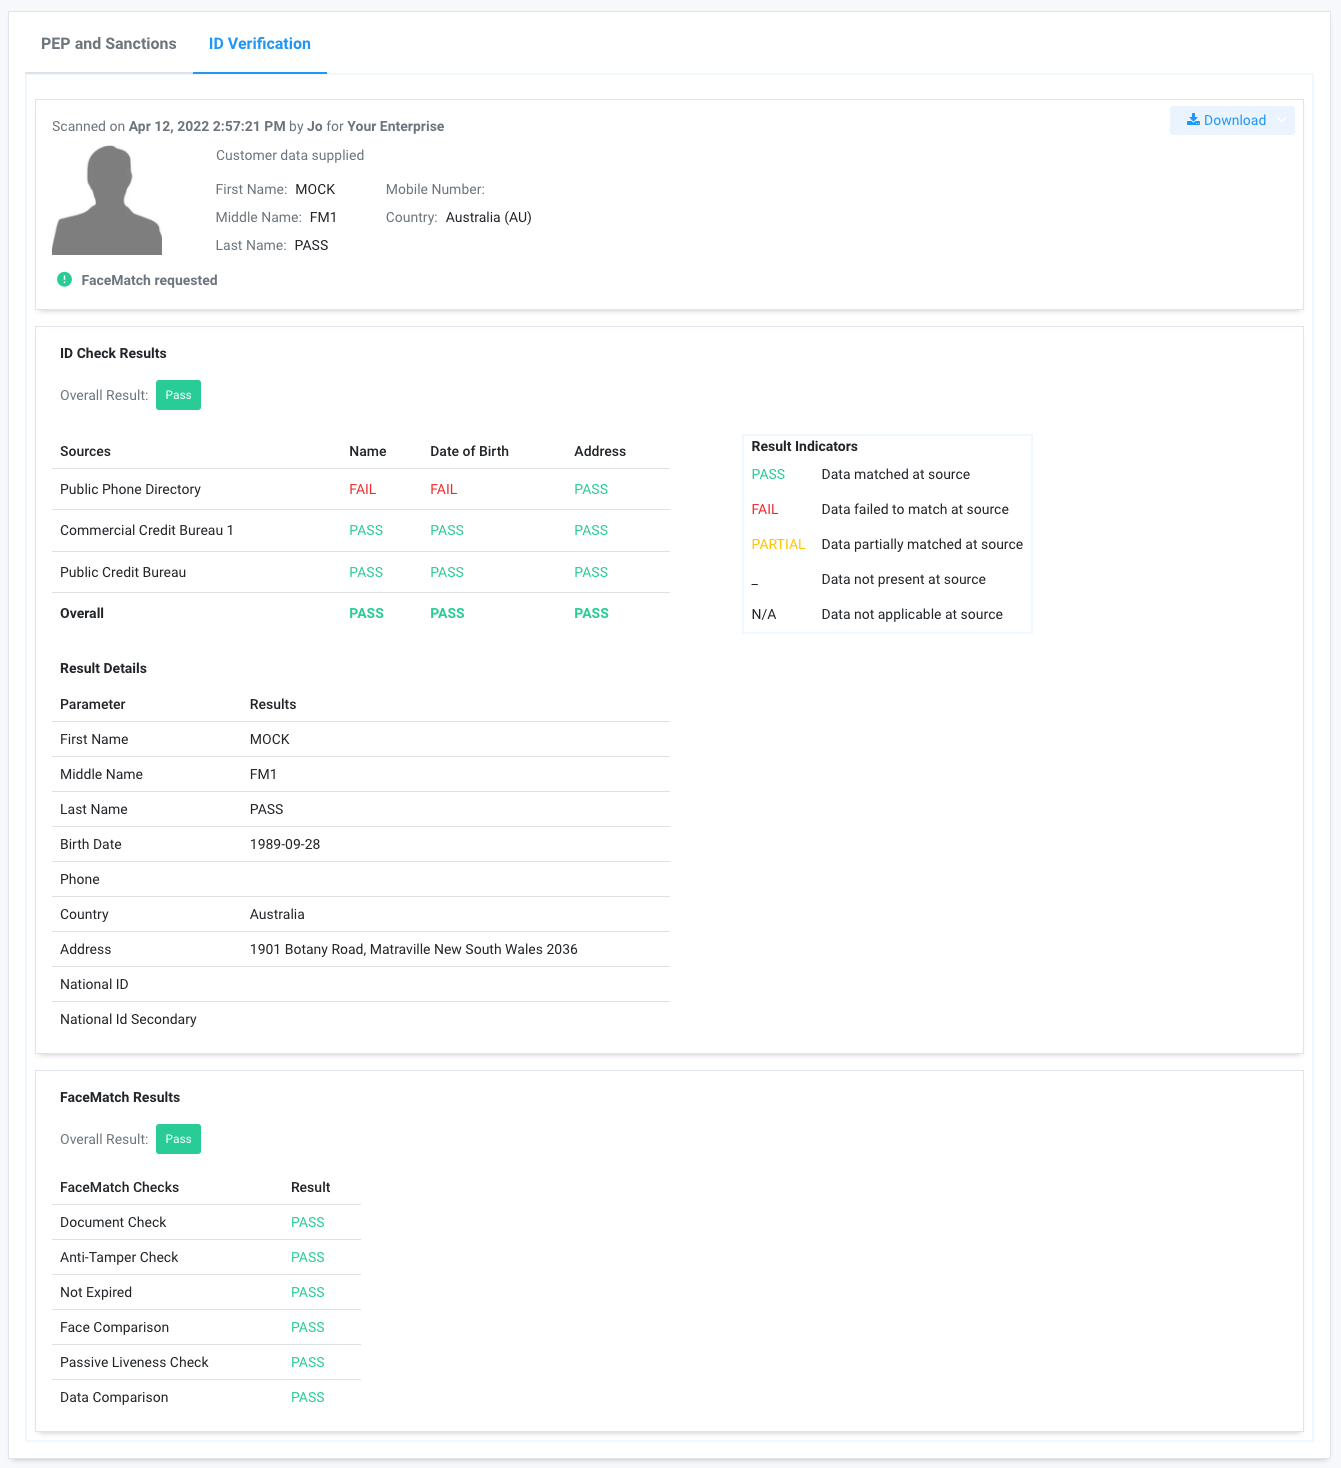 Comprehensive ID verification Result with FaceMatch Check